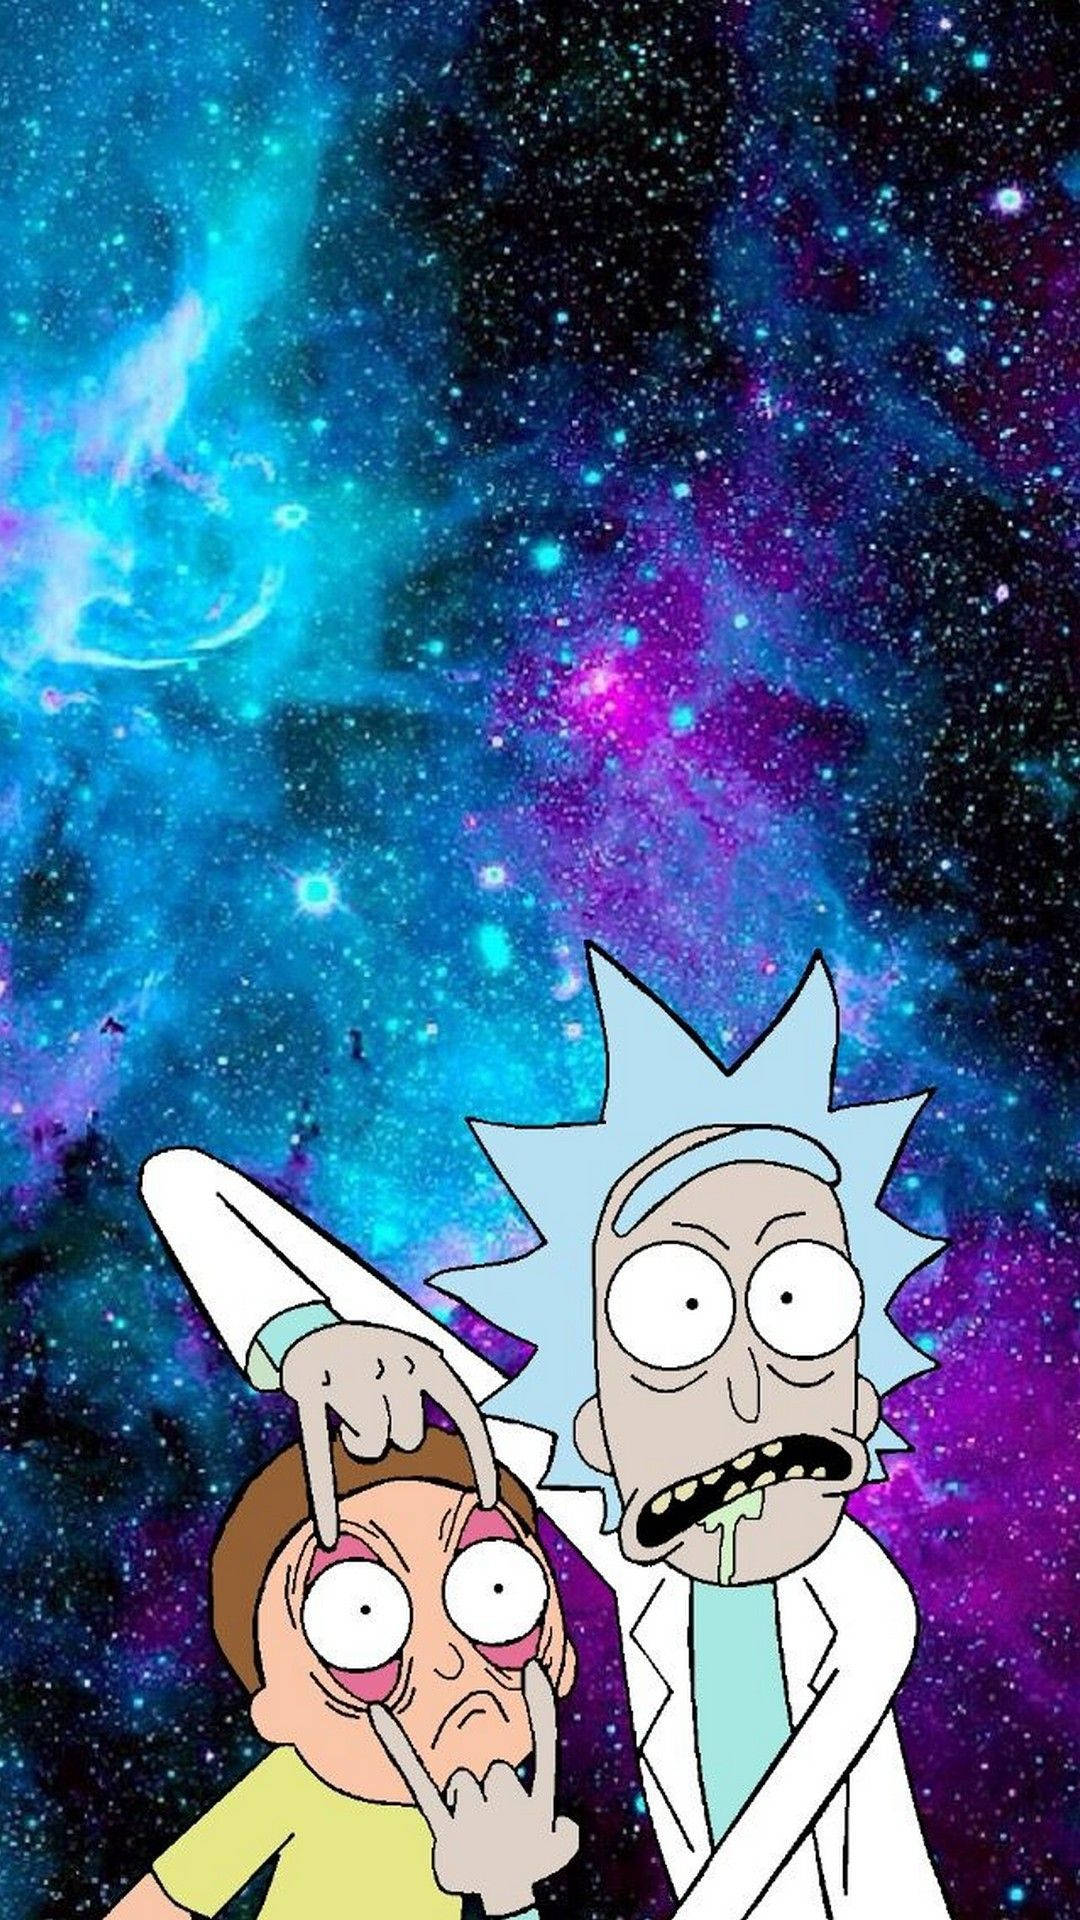 Top 25 Best Rick and Morty iPhone Wallpapers  GettyWallpapers